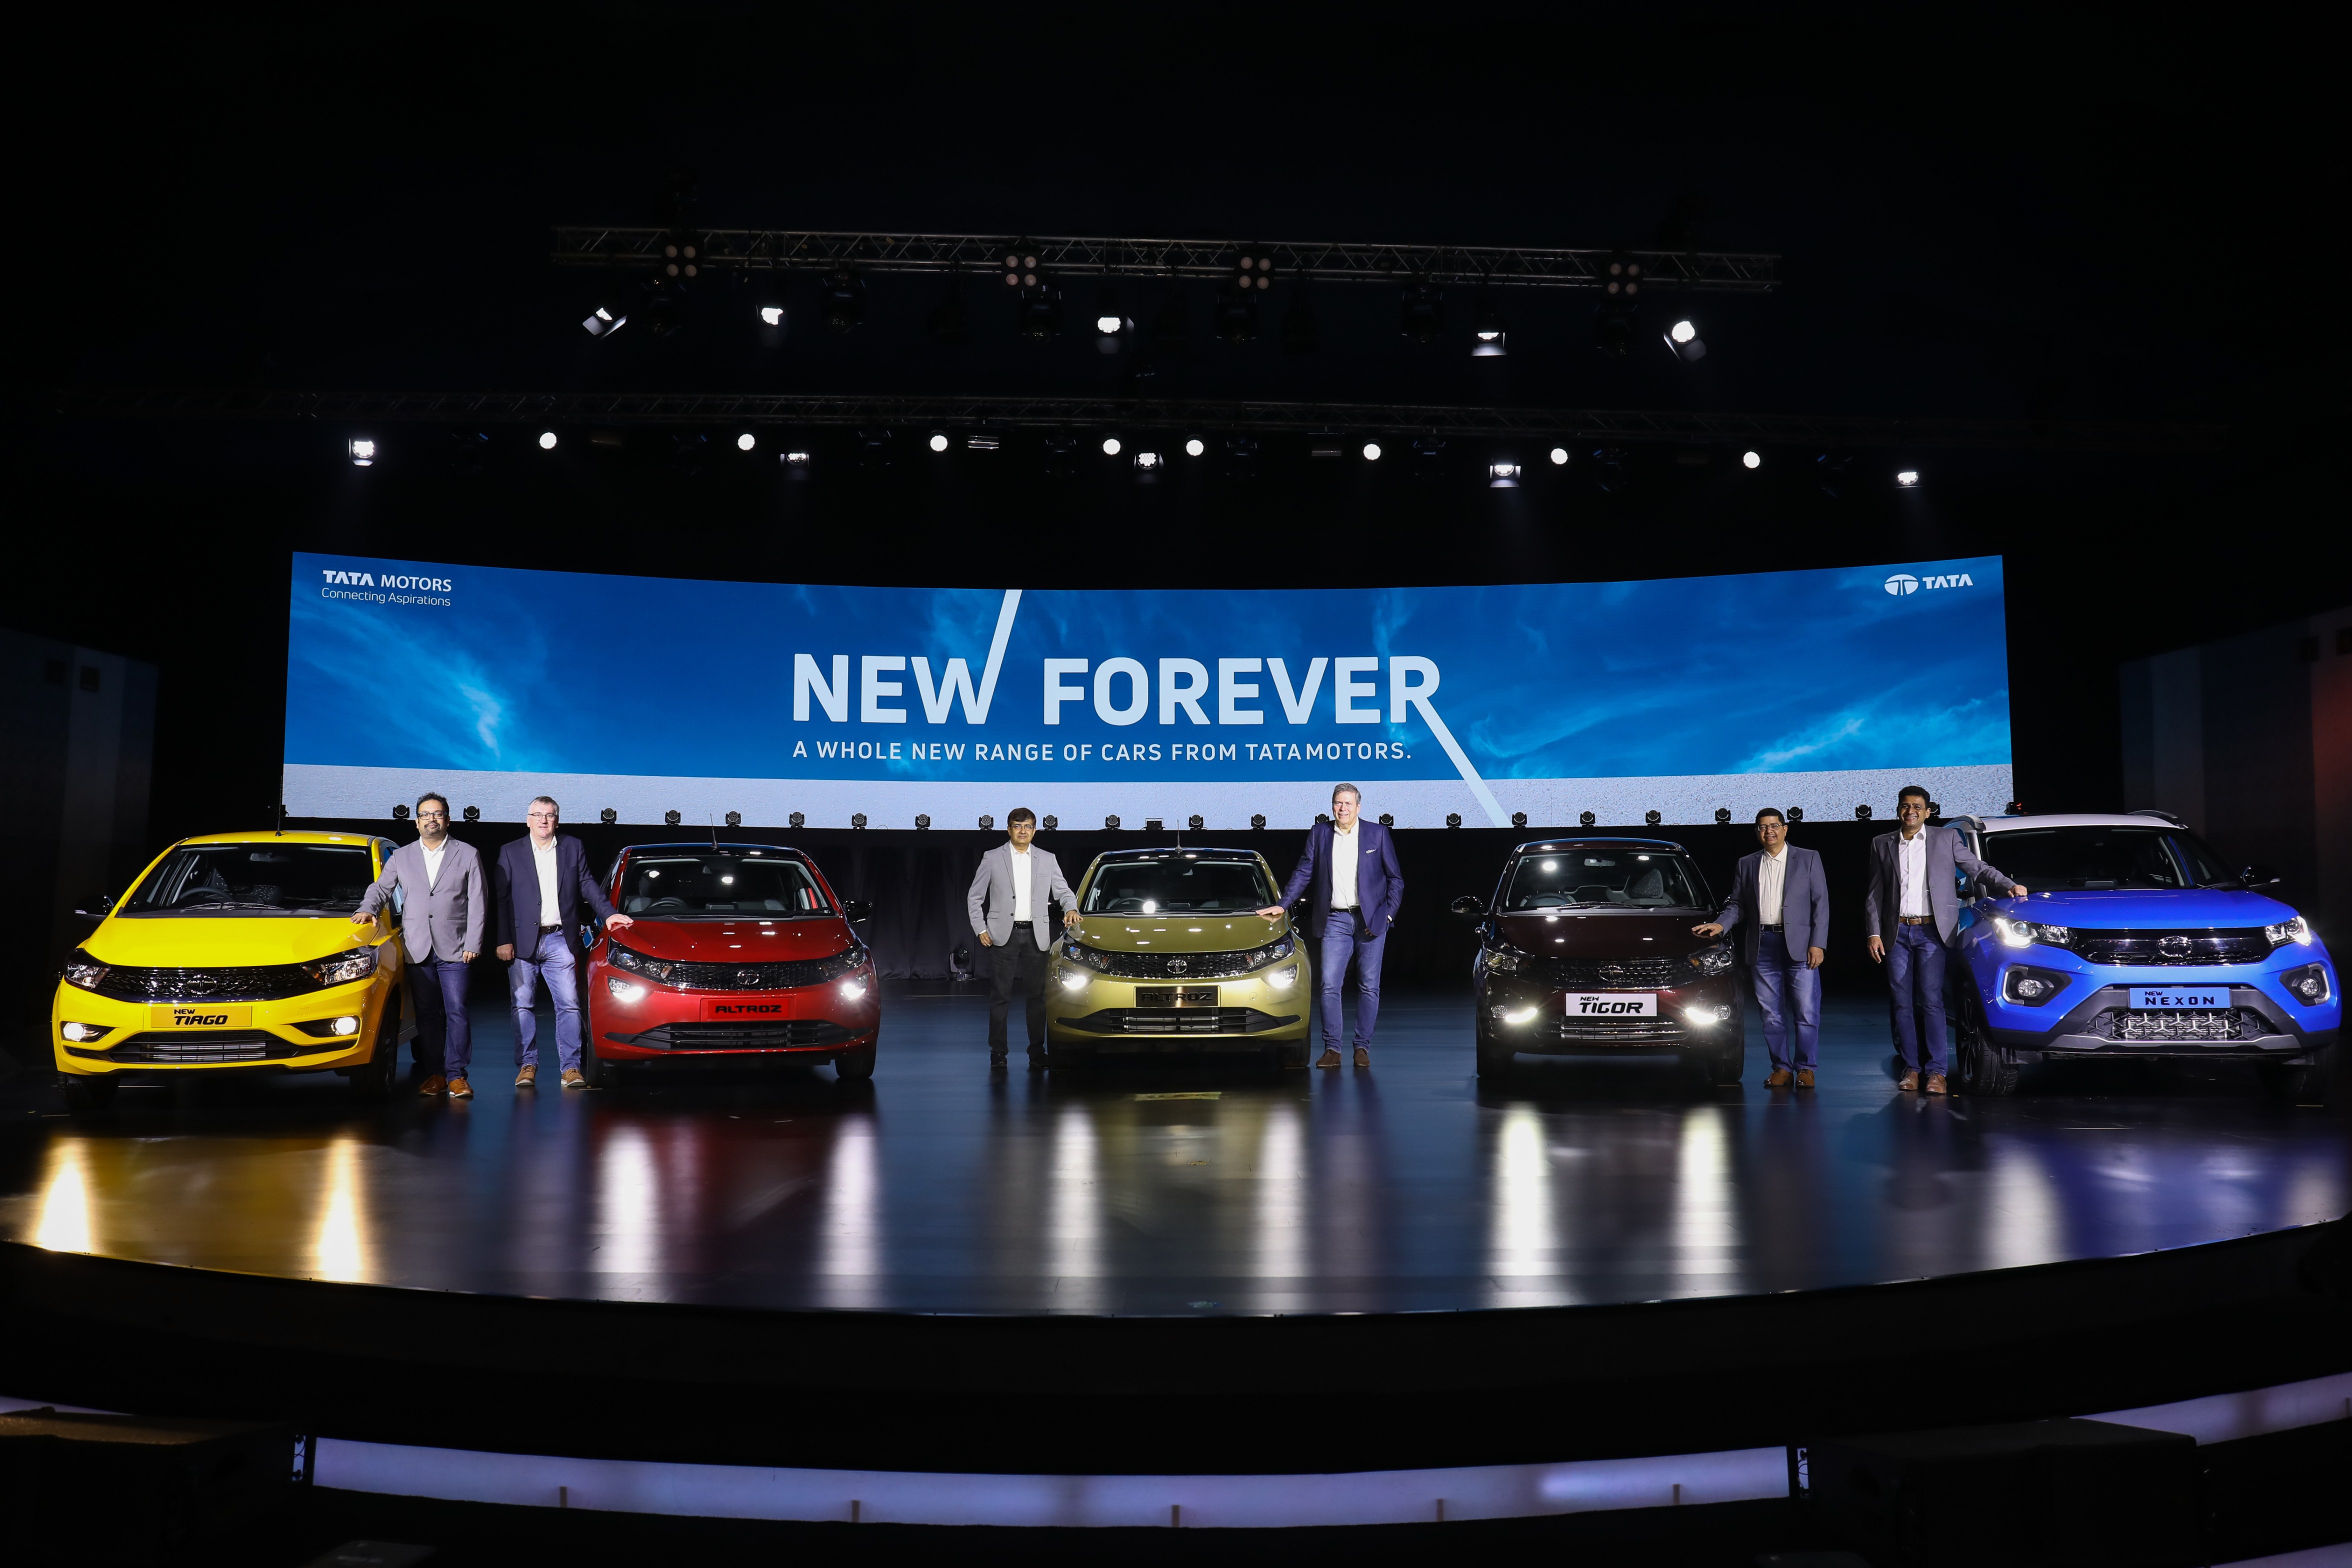 New Premium Hatch – Altroz launched at Rs. 5.29 lakh, Tiago, Tigor & Nexon Facelift also launched!